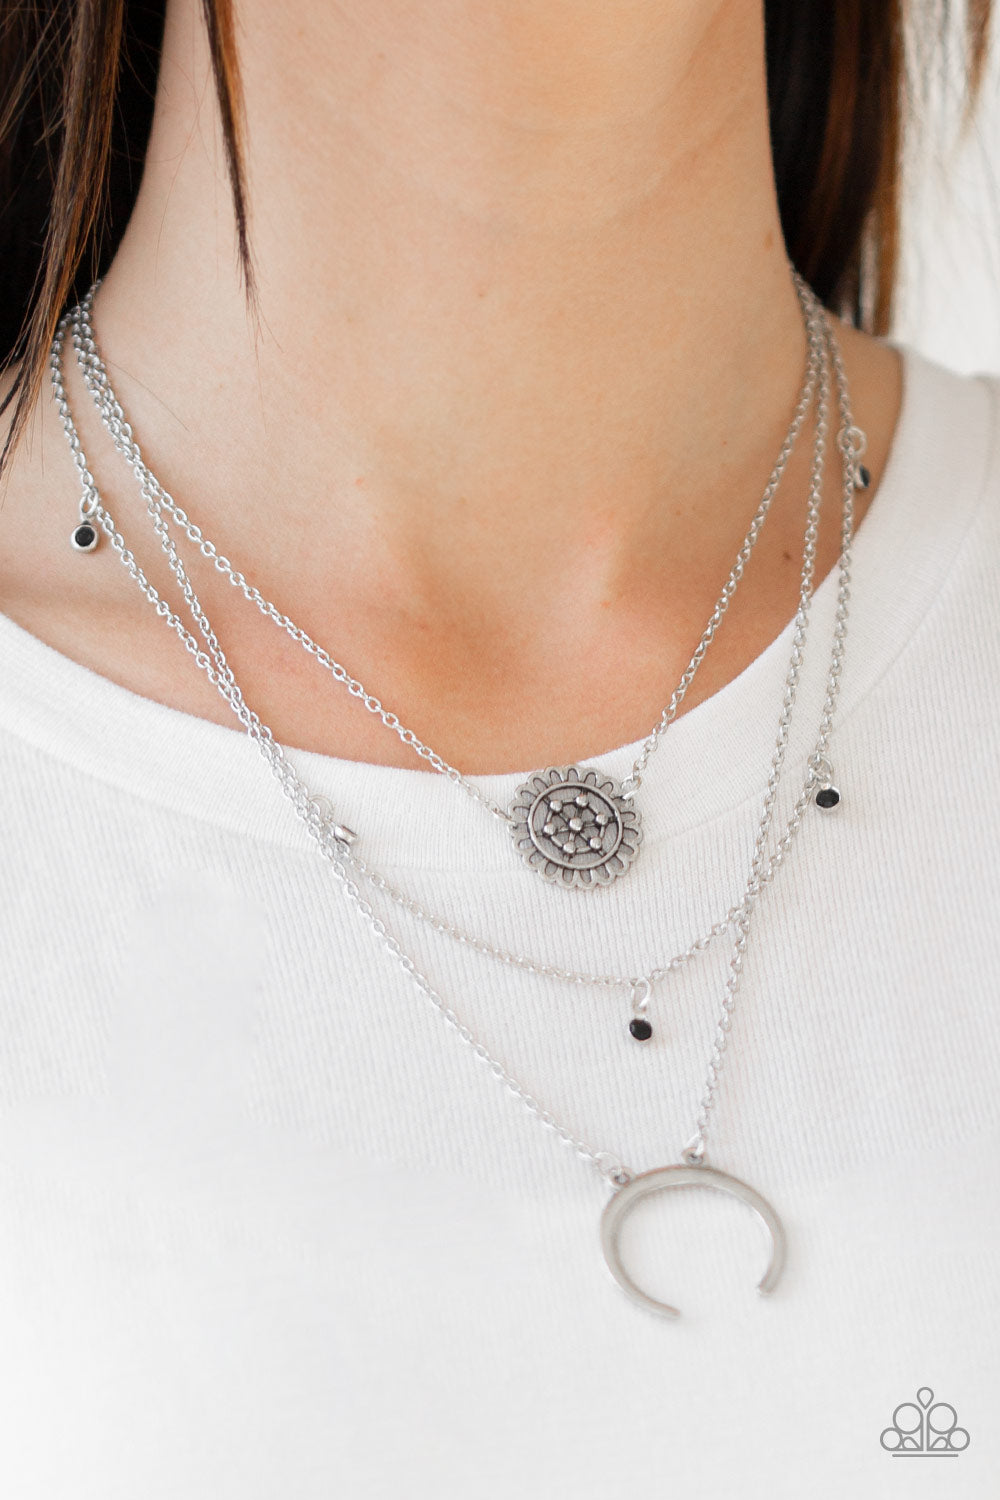 Paparazzi Lunar Lotus - Black Necklace - A Finishing Touch Jewelry